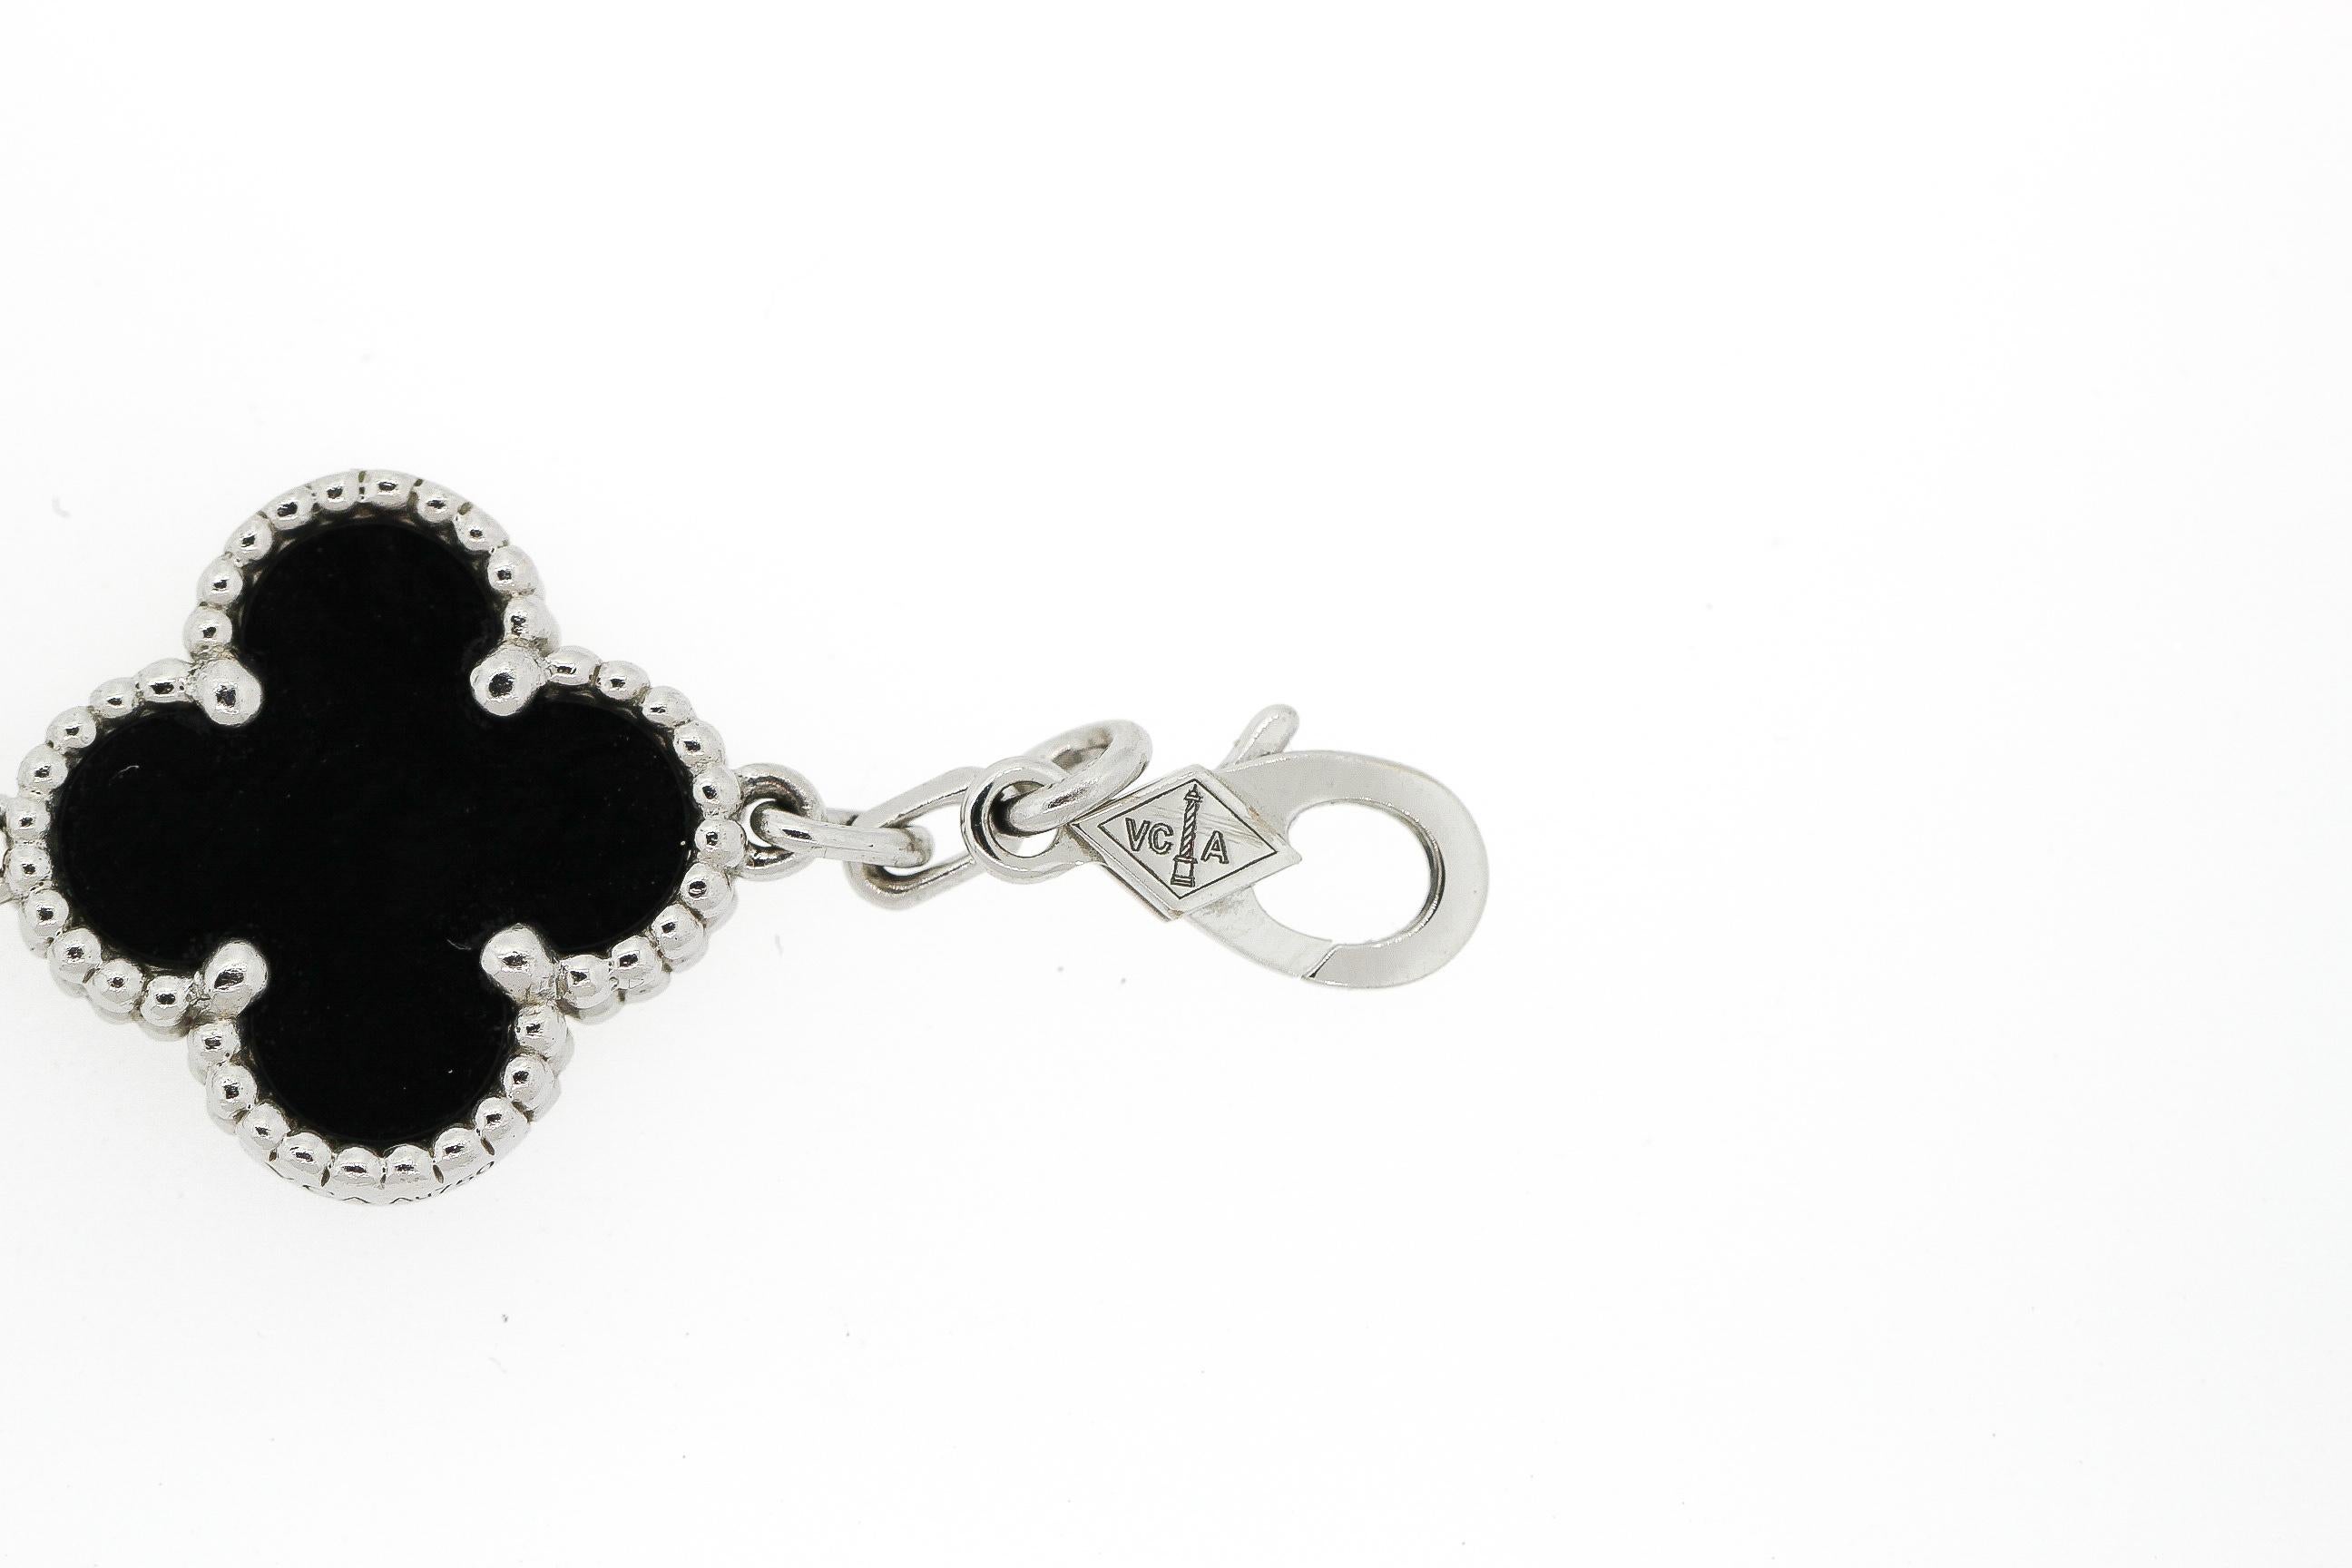 A modern black onyx and diamond 5 motif Alhambra bracelet by Van Cleef & Arpels. The bracelet is made in 18k white gold and set with white diamonds that are D to F color and VS clarity. There are 24 stones that weigh 0.96 carats. There are three